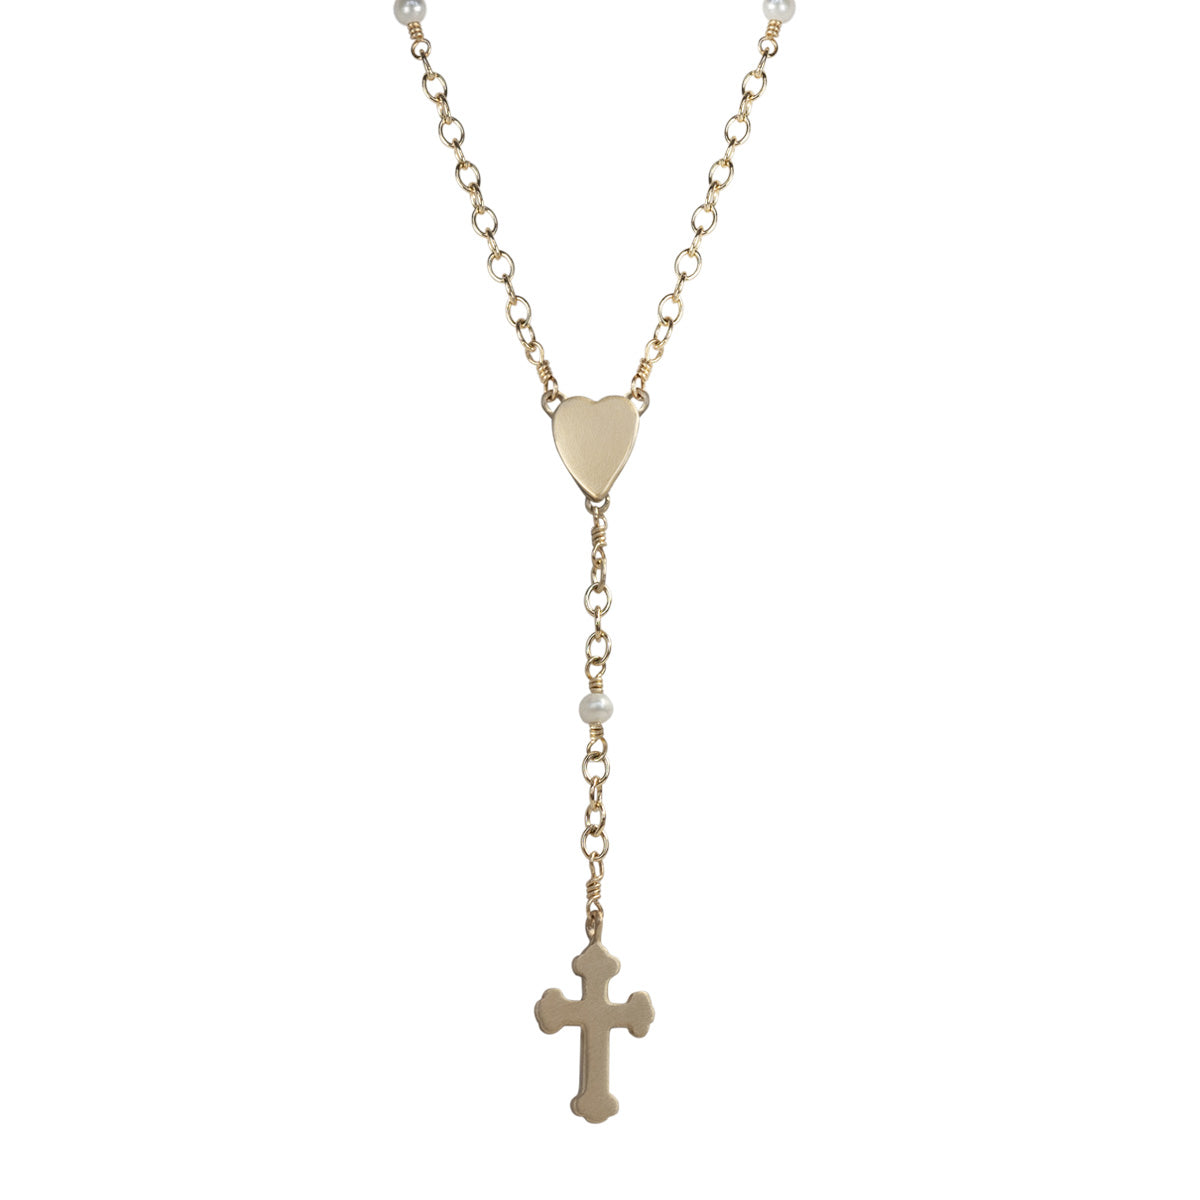 10K Gold Heart and Cross Rosary Necklace on Pearl Chain